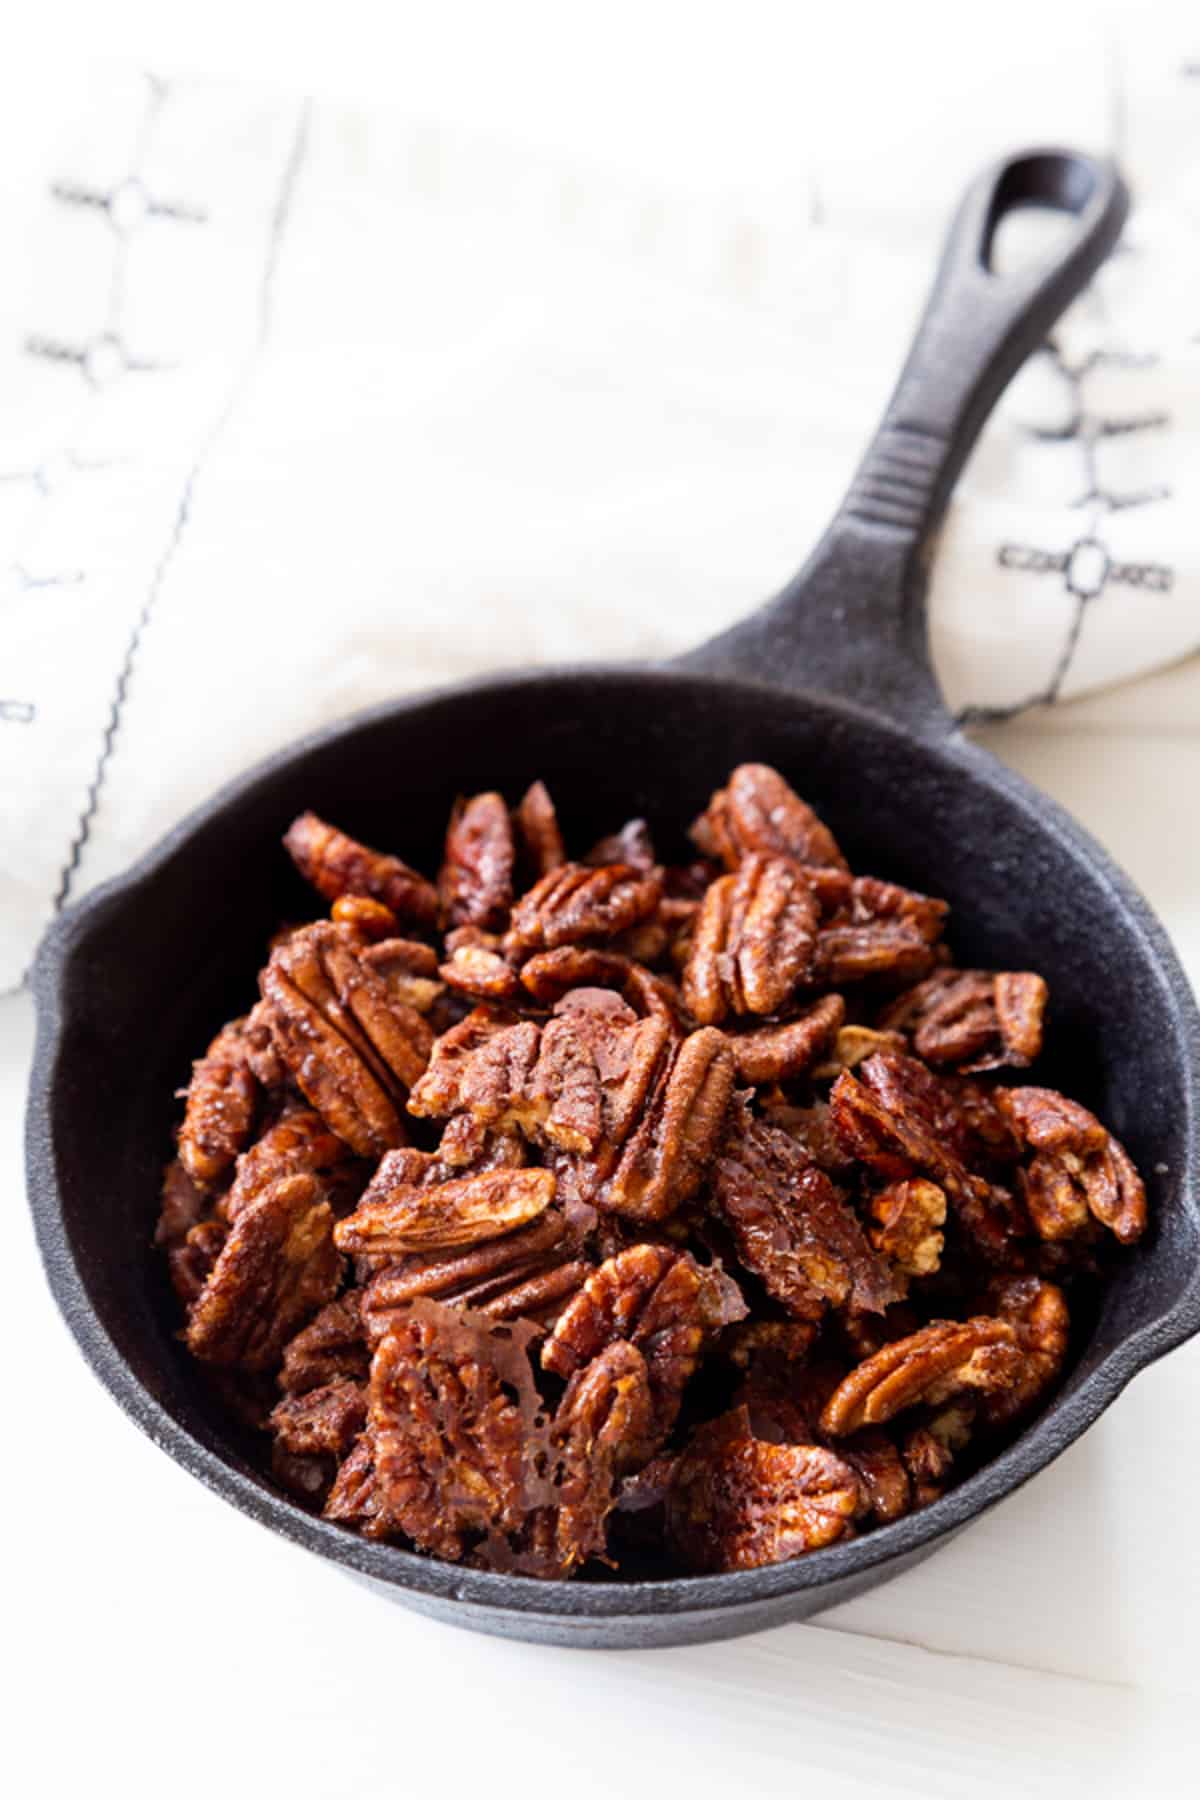 A cast iron skillet filled with cinnamon pecans.